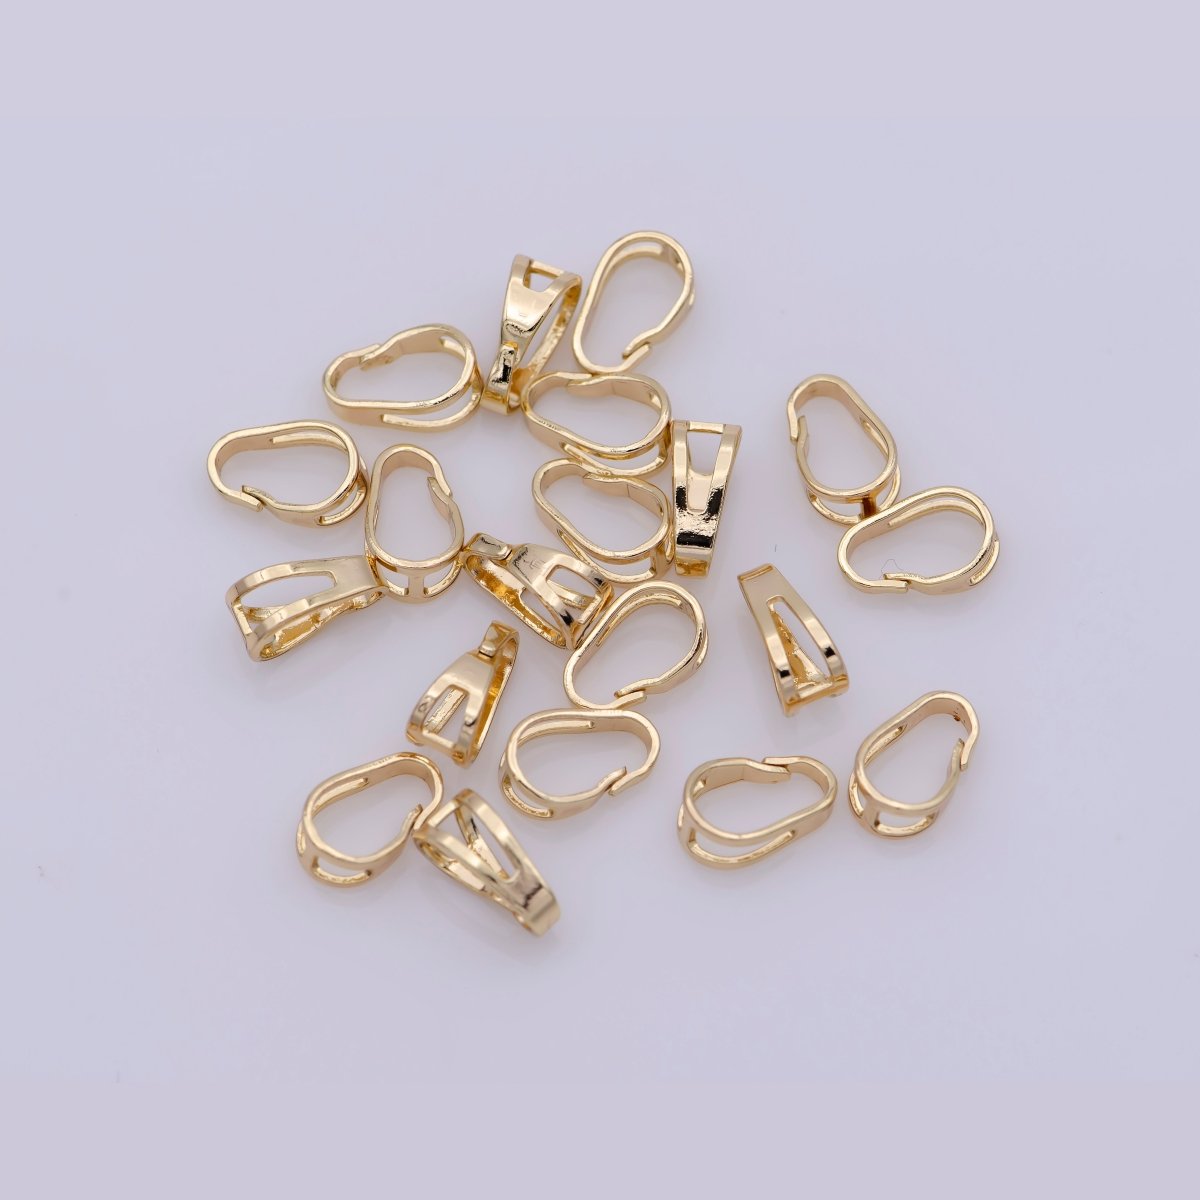 20x Bail For Pendant Snap-on for Pendant, Clip On Bail for Necklace Jewelry Making Bulk Wholesale Findings 18K Gold Filled 8.6x5.3mm - DLUXCA